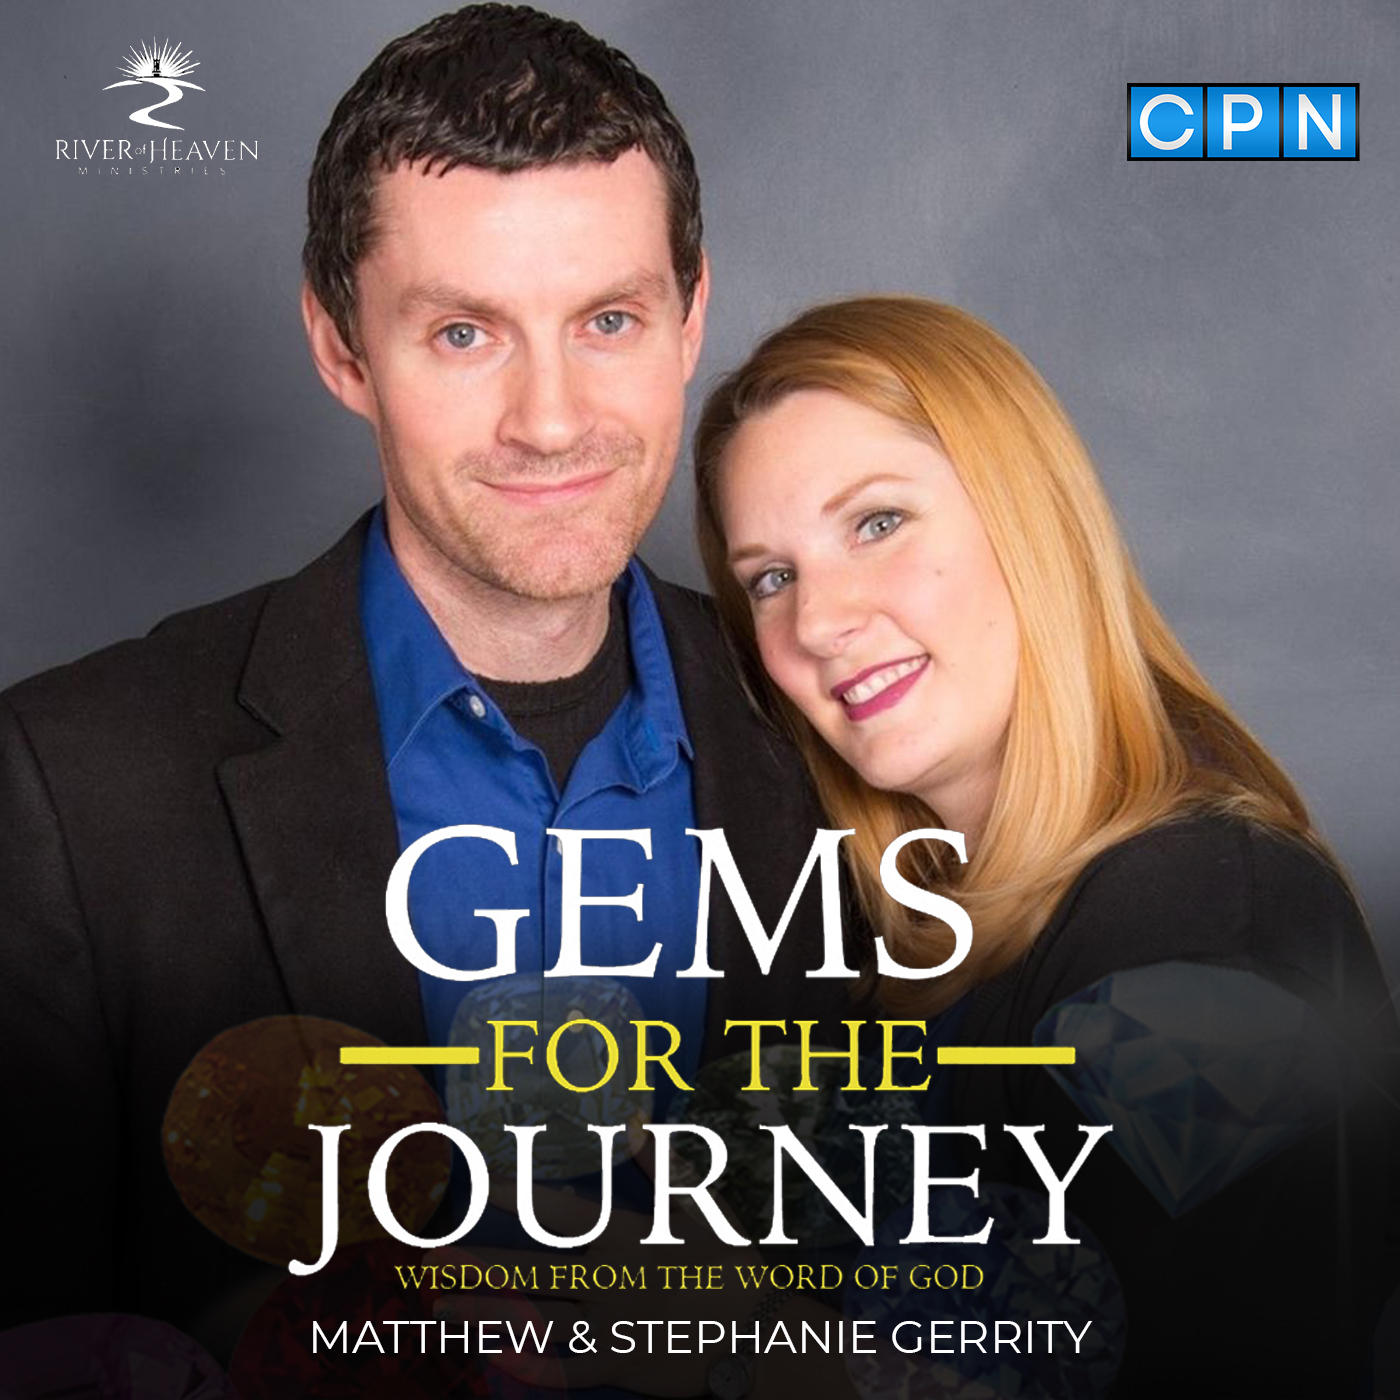 Introducing, Gems For The Journey!